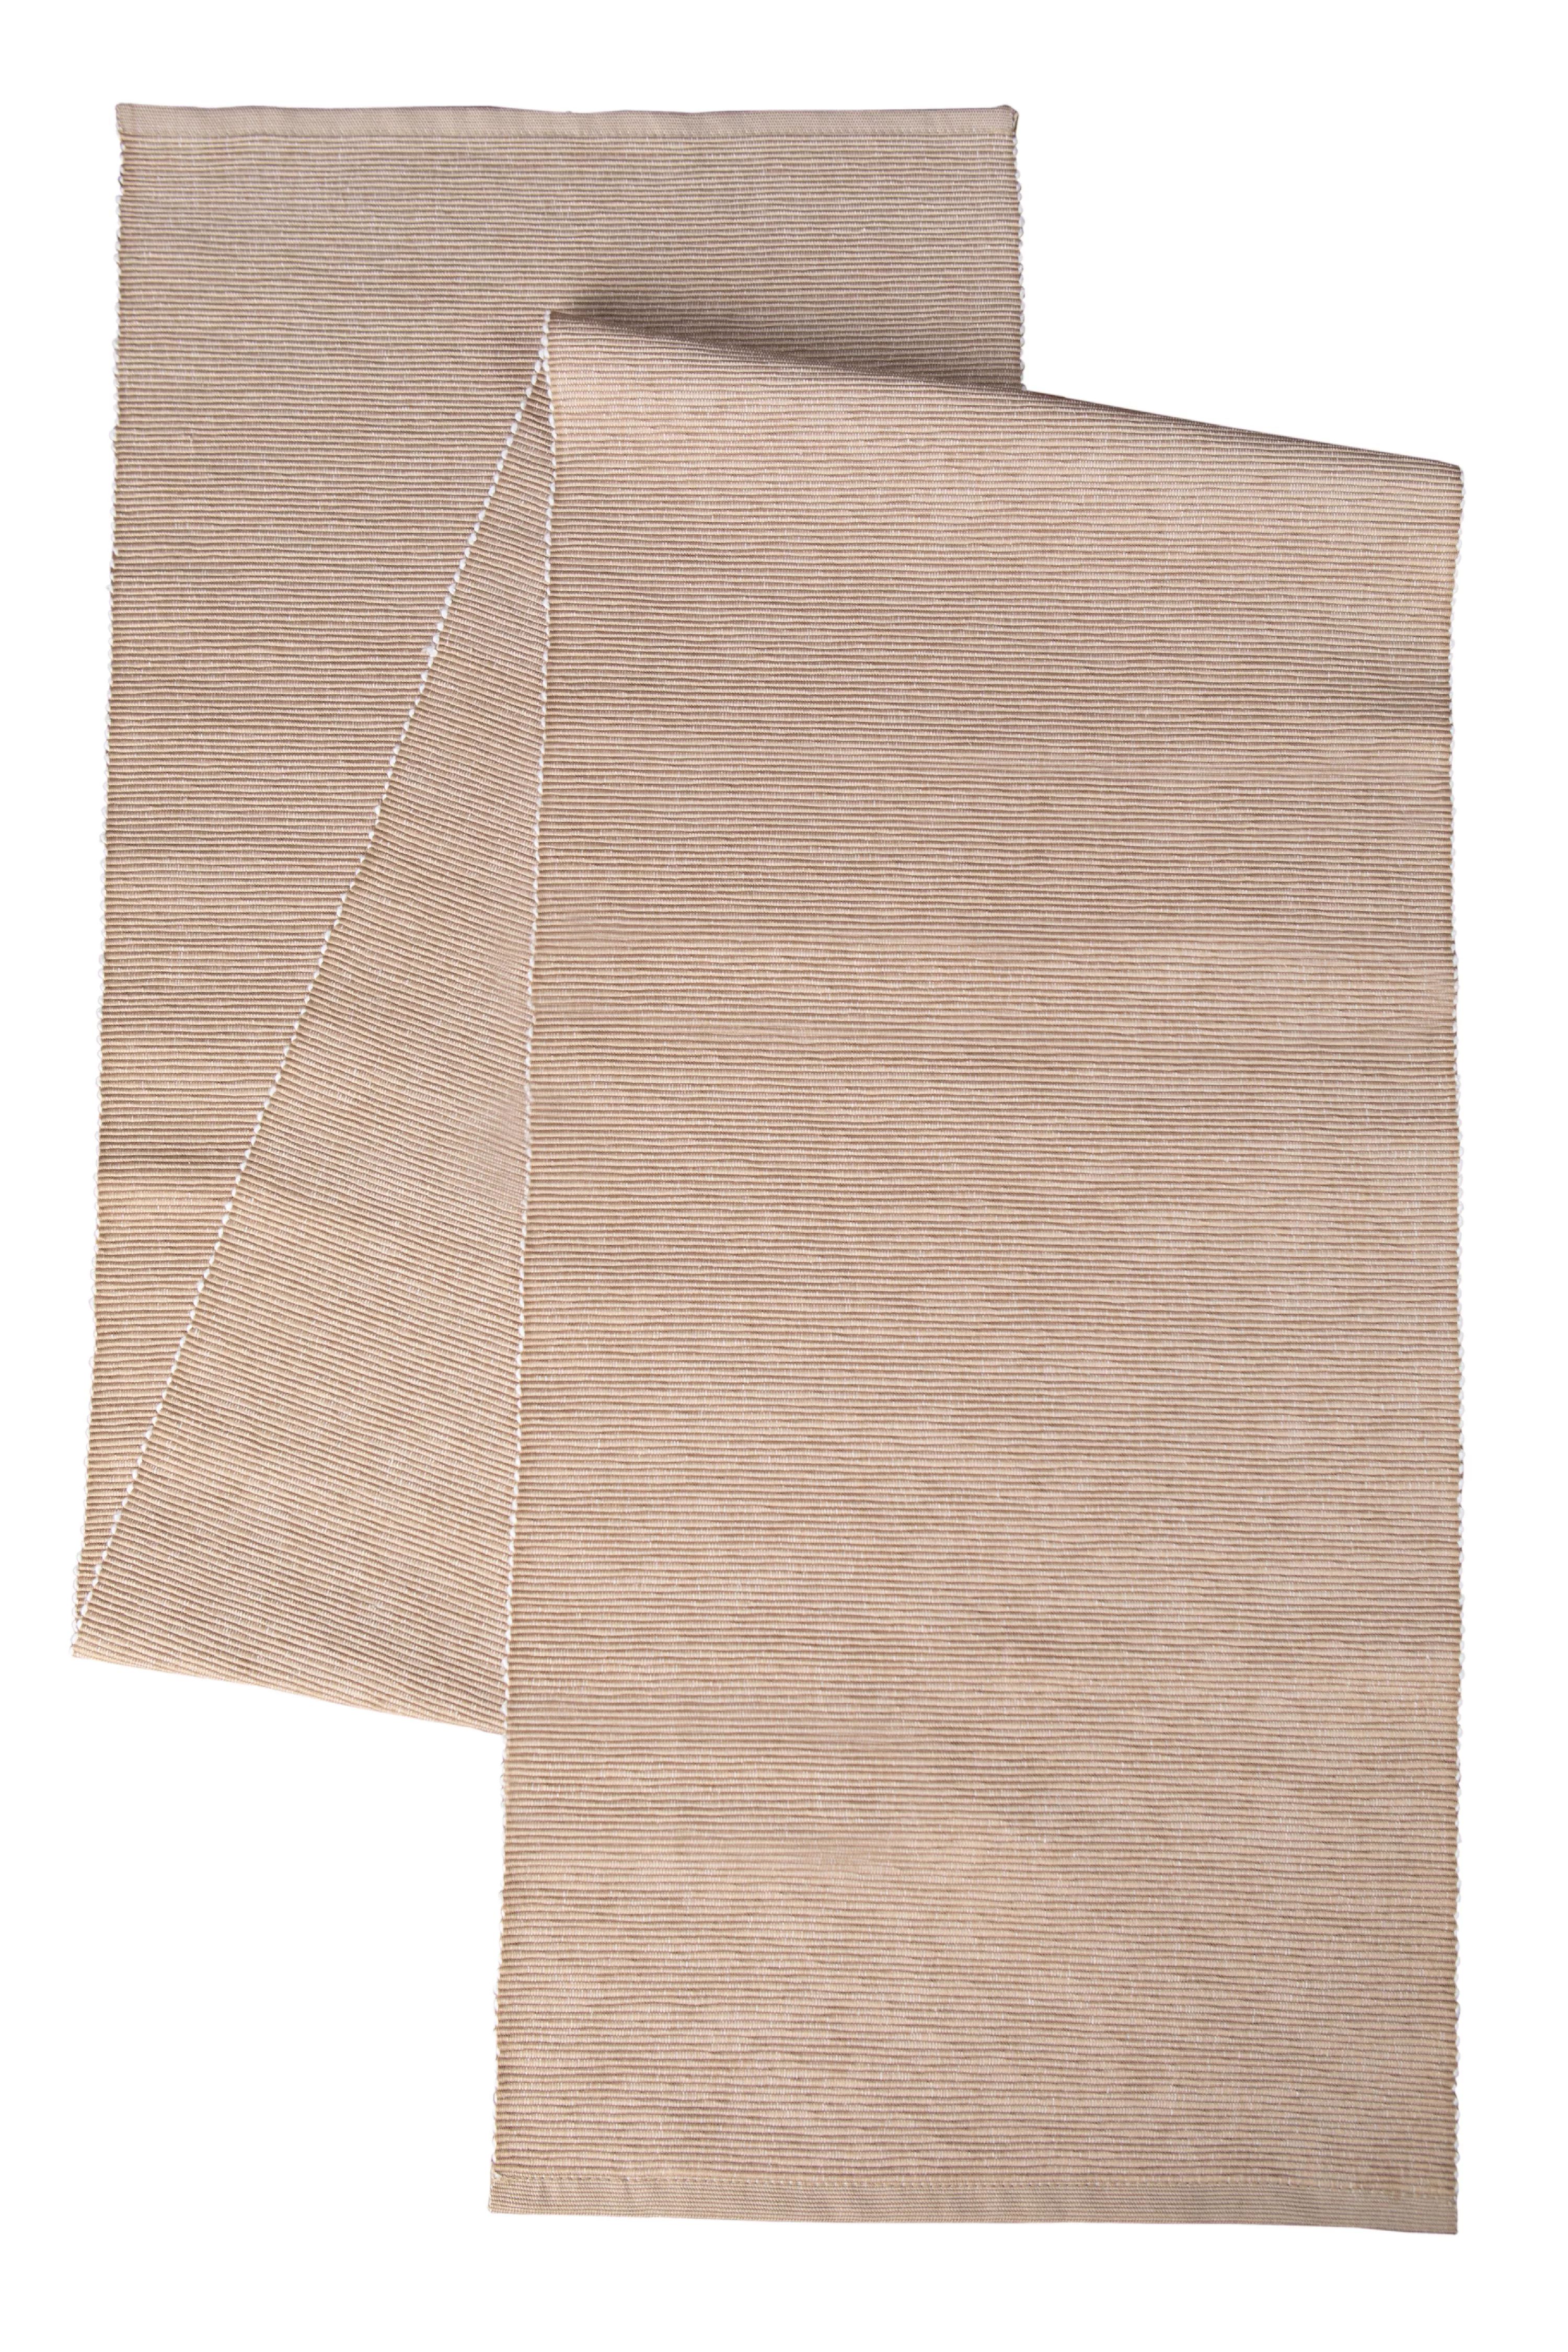 Mainstays Ribbed Chambray Table Runner, 13 in x 72 in, Cotton Polyester Blend, Tan, 1 Piece - Wal... | Walmart (US)